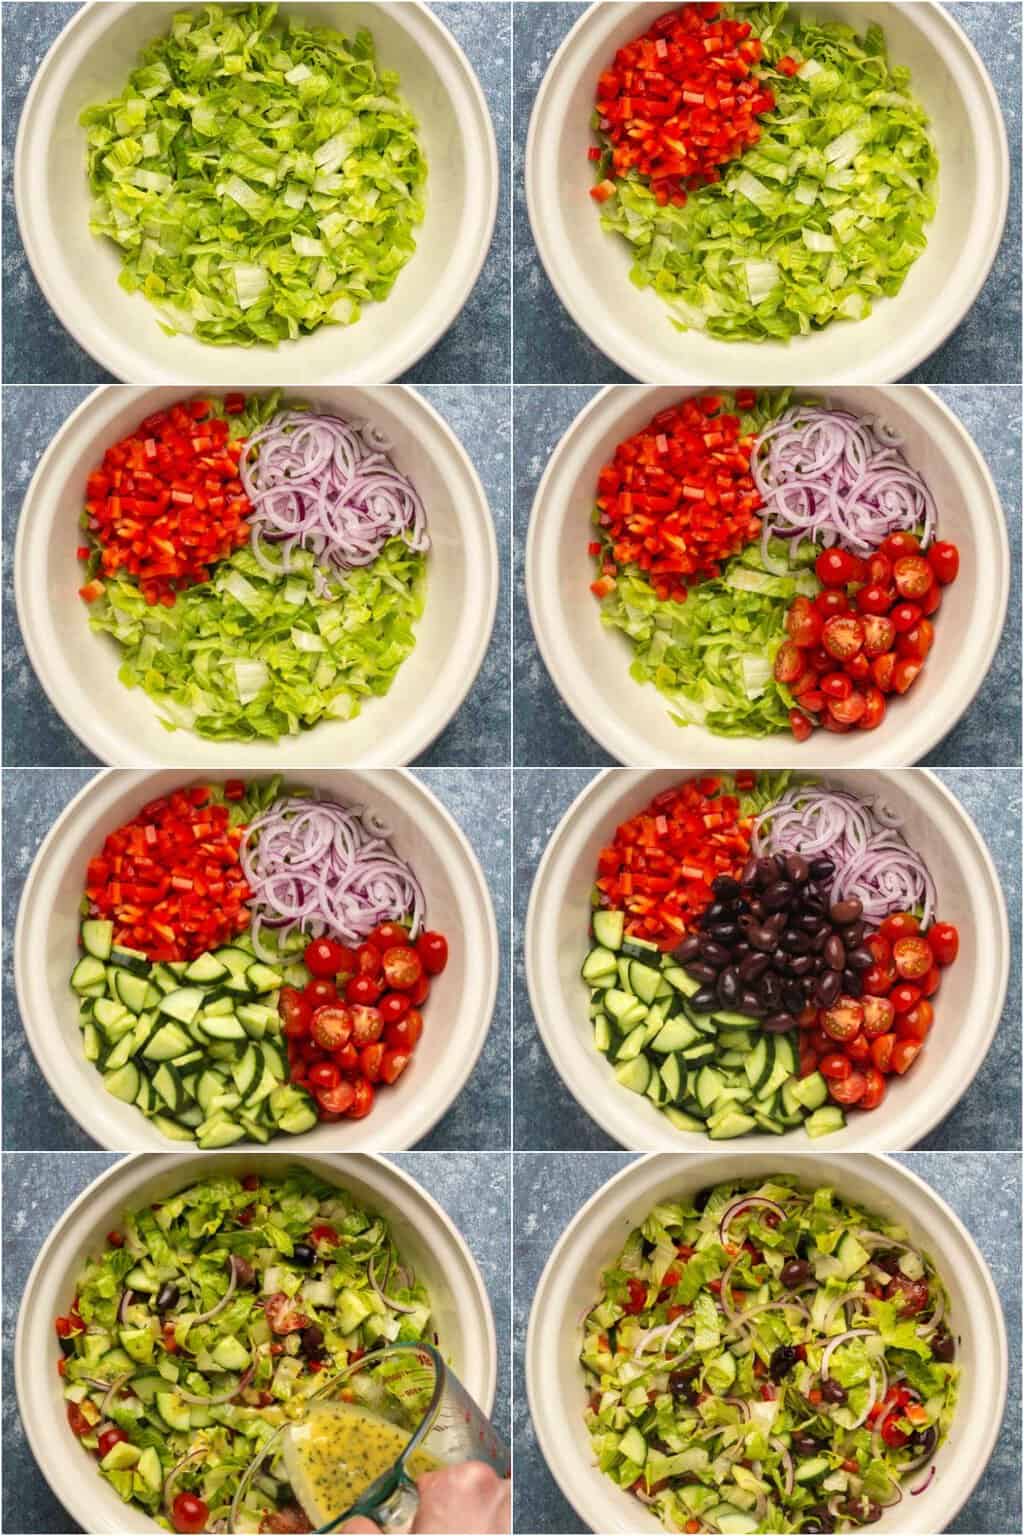 Step by step process photo collage of assembling a vegan Greek salad.